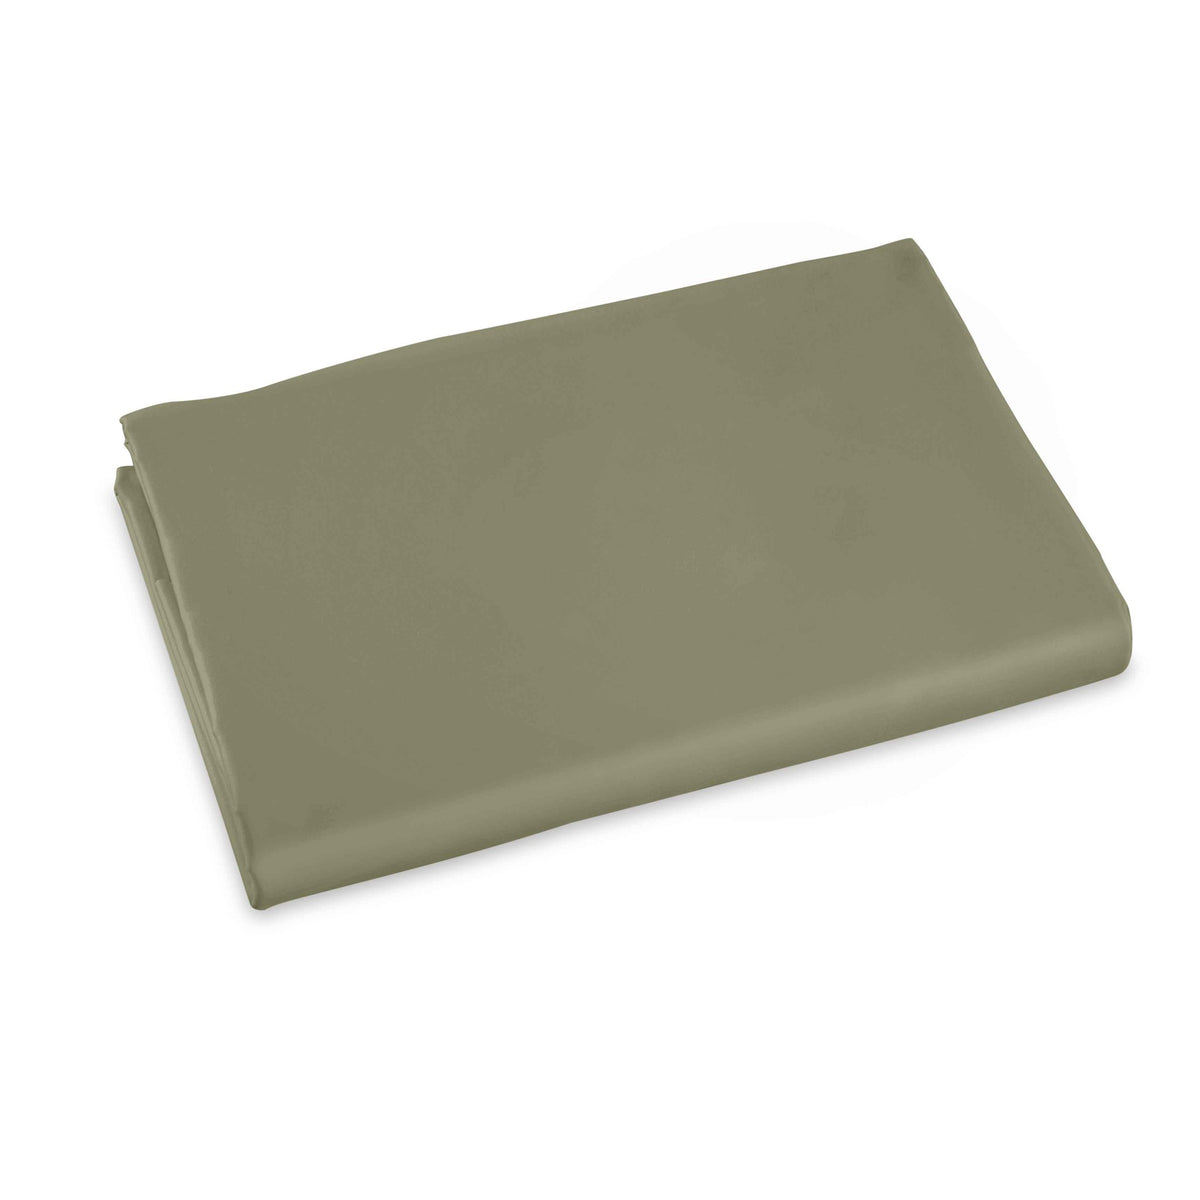 Clear Image of Signoria Raffaello Fitted Sheet in Olive Green Color